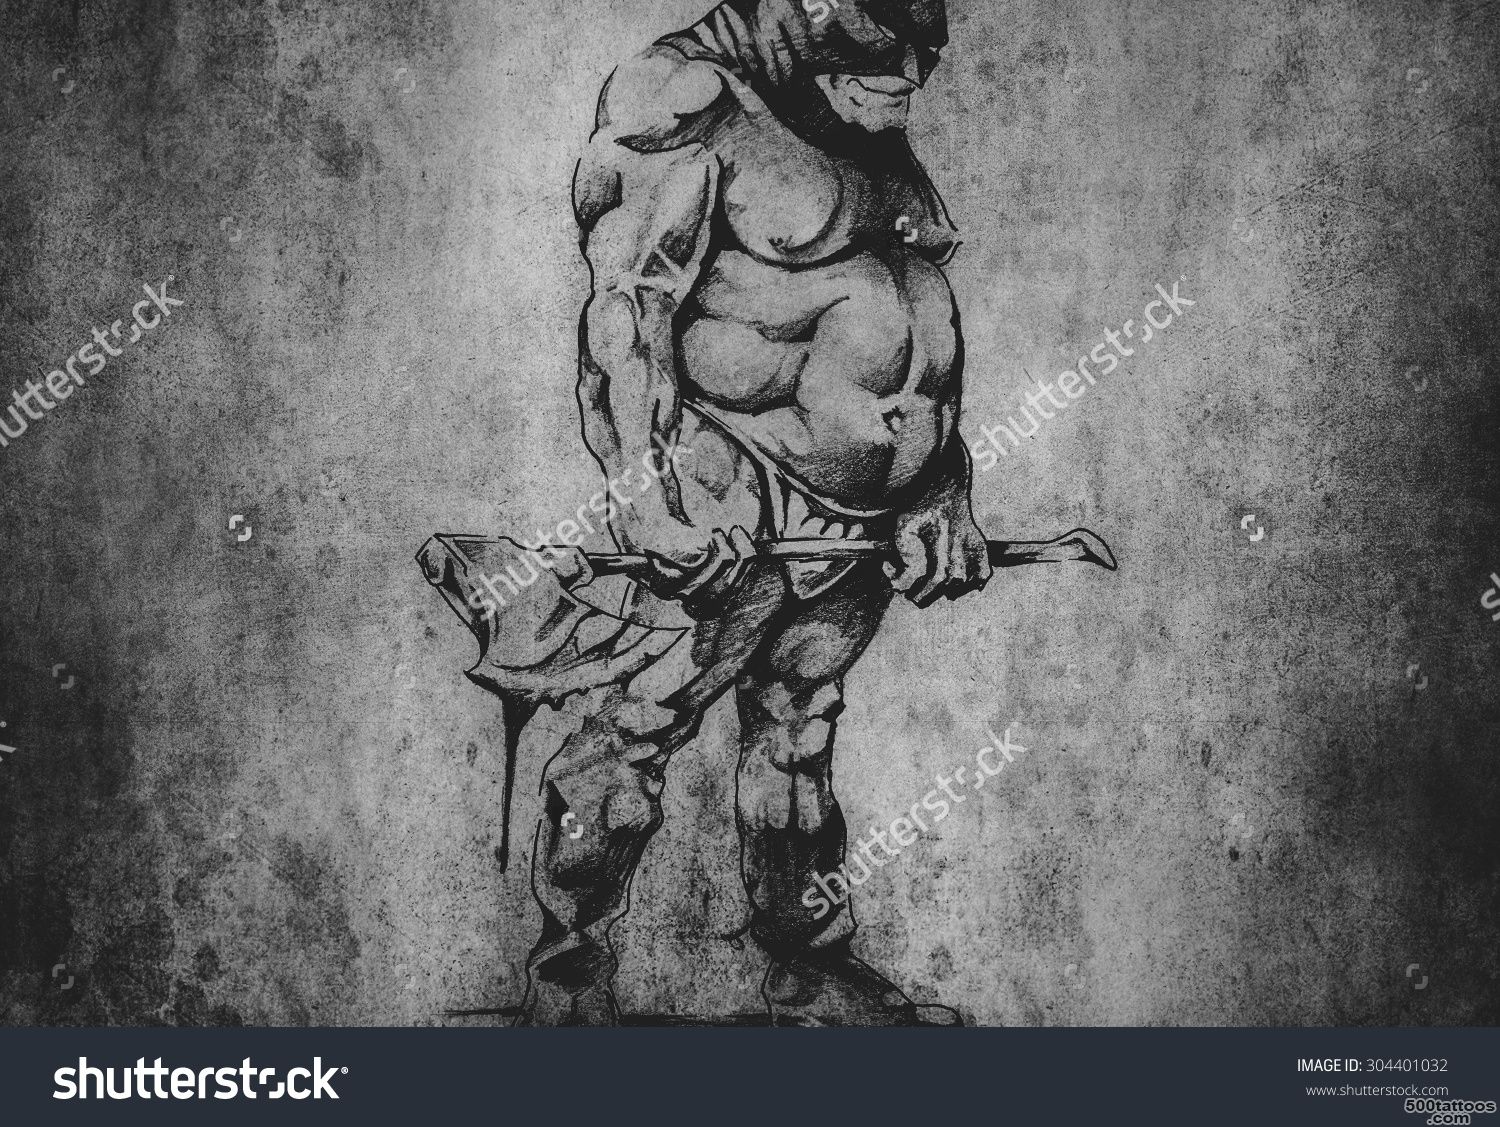 Tattoo Art, Sketch Of An Executioner Stock Photo 304401032 ..._31